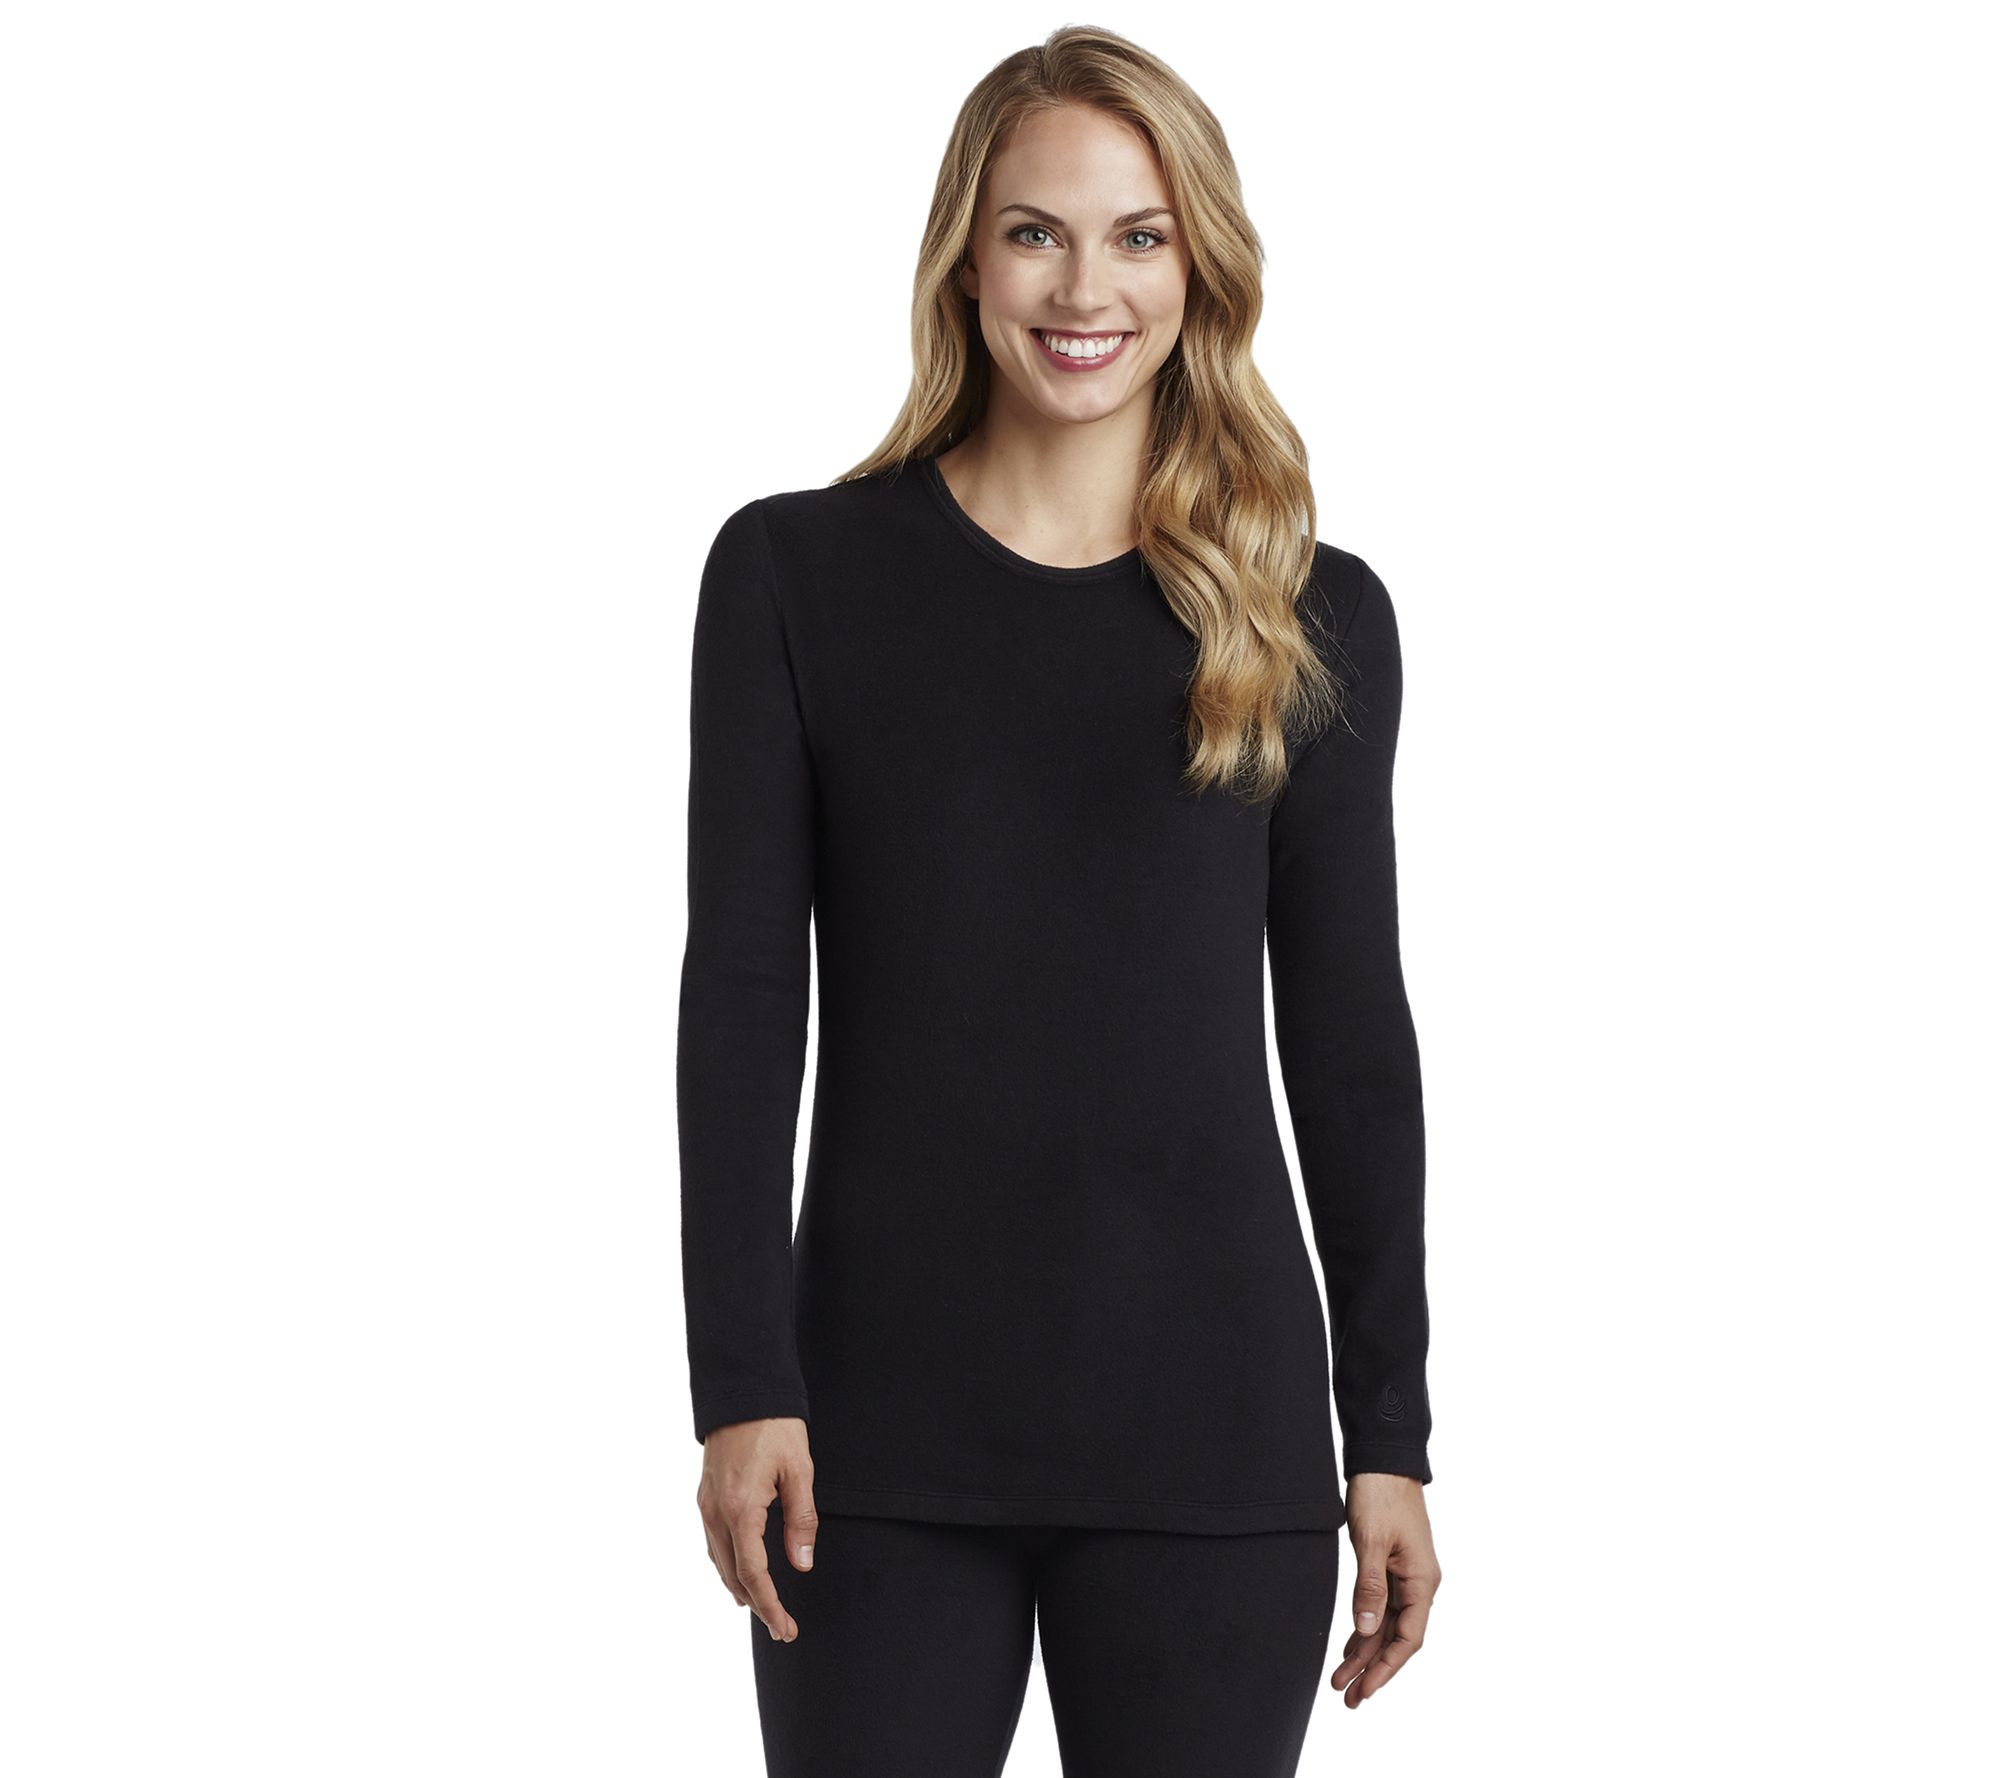 Cuddl Duds Fleecewear with Stretch Long SleeveCrew Neck Top 